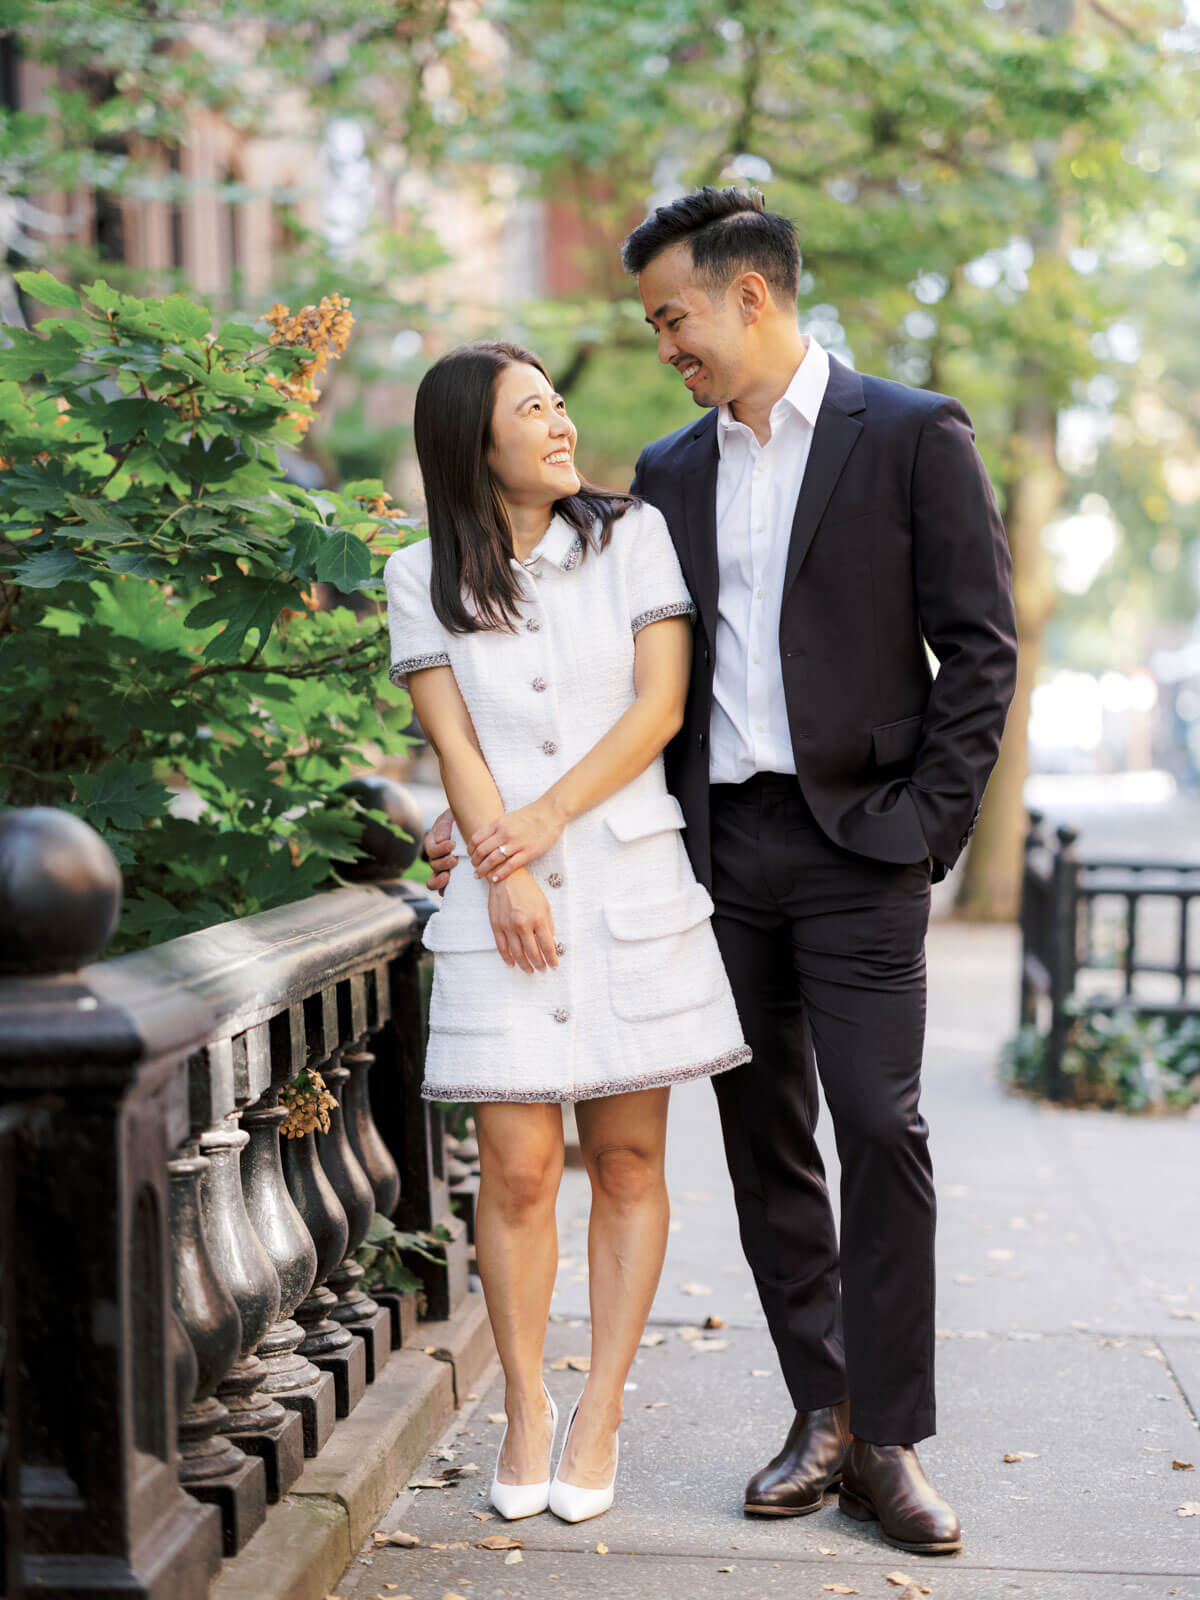 The engaged couple is looking happily at each other at West Village, NYC. Image by Jenny Fu Studio